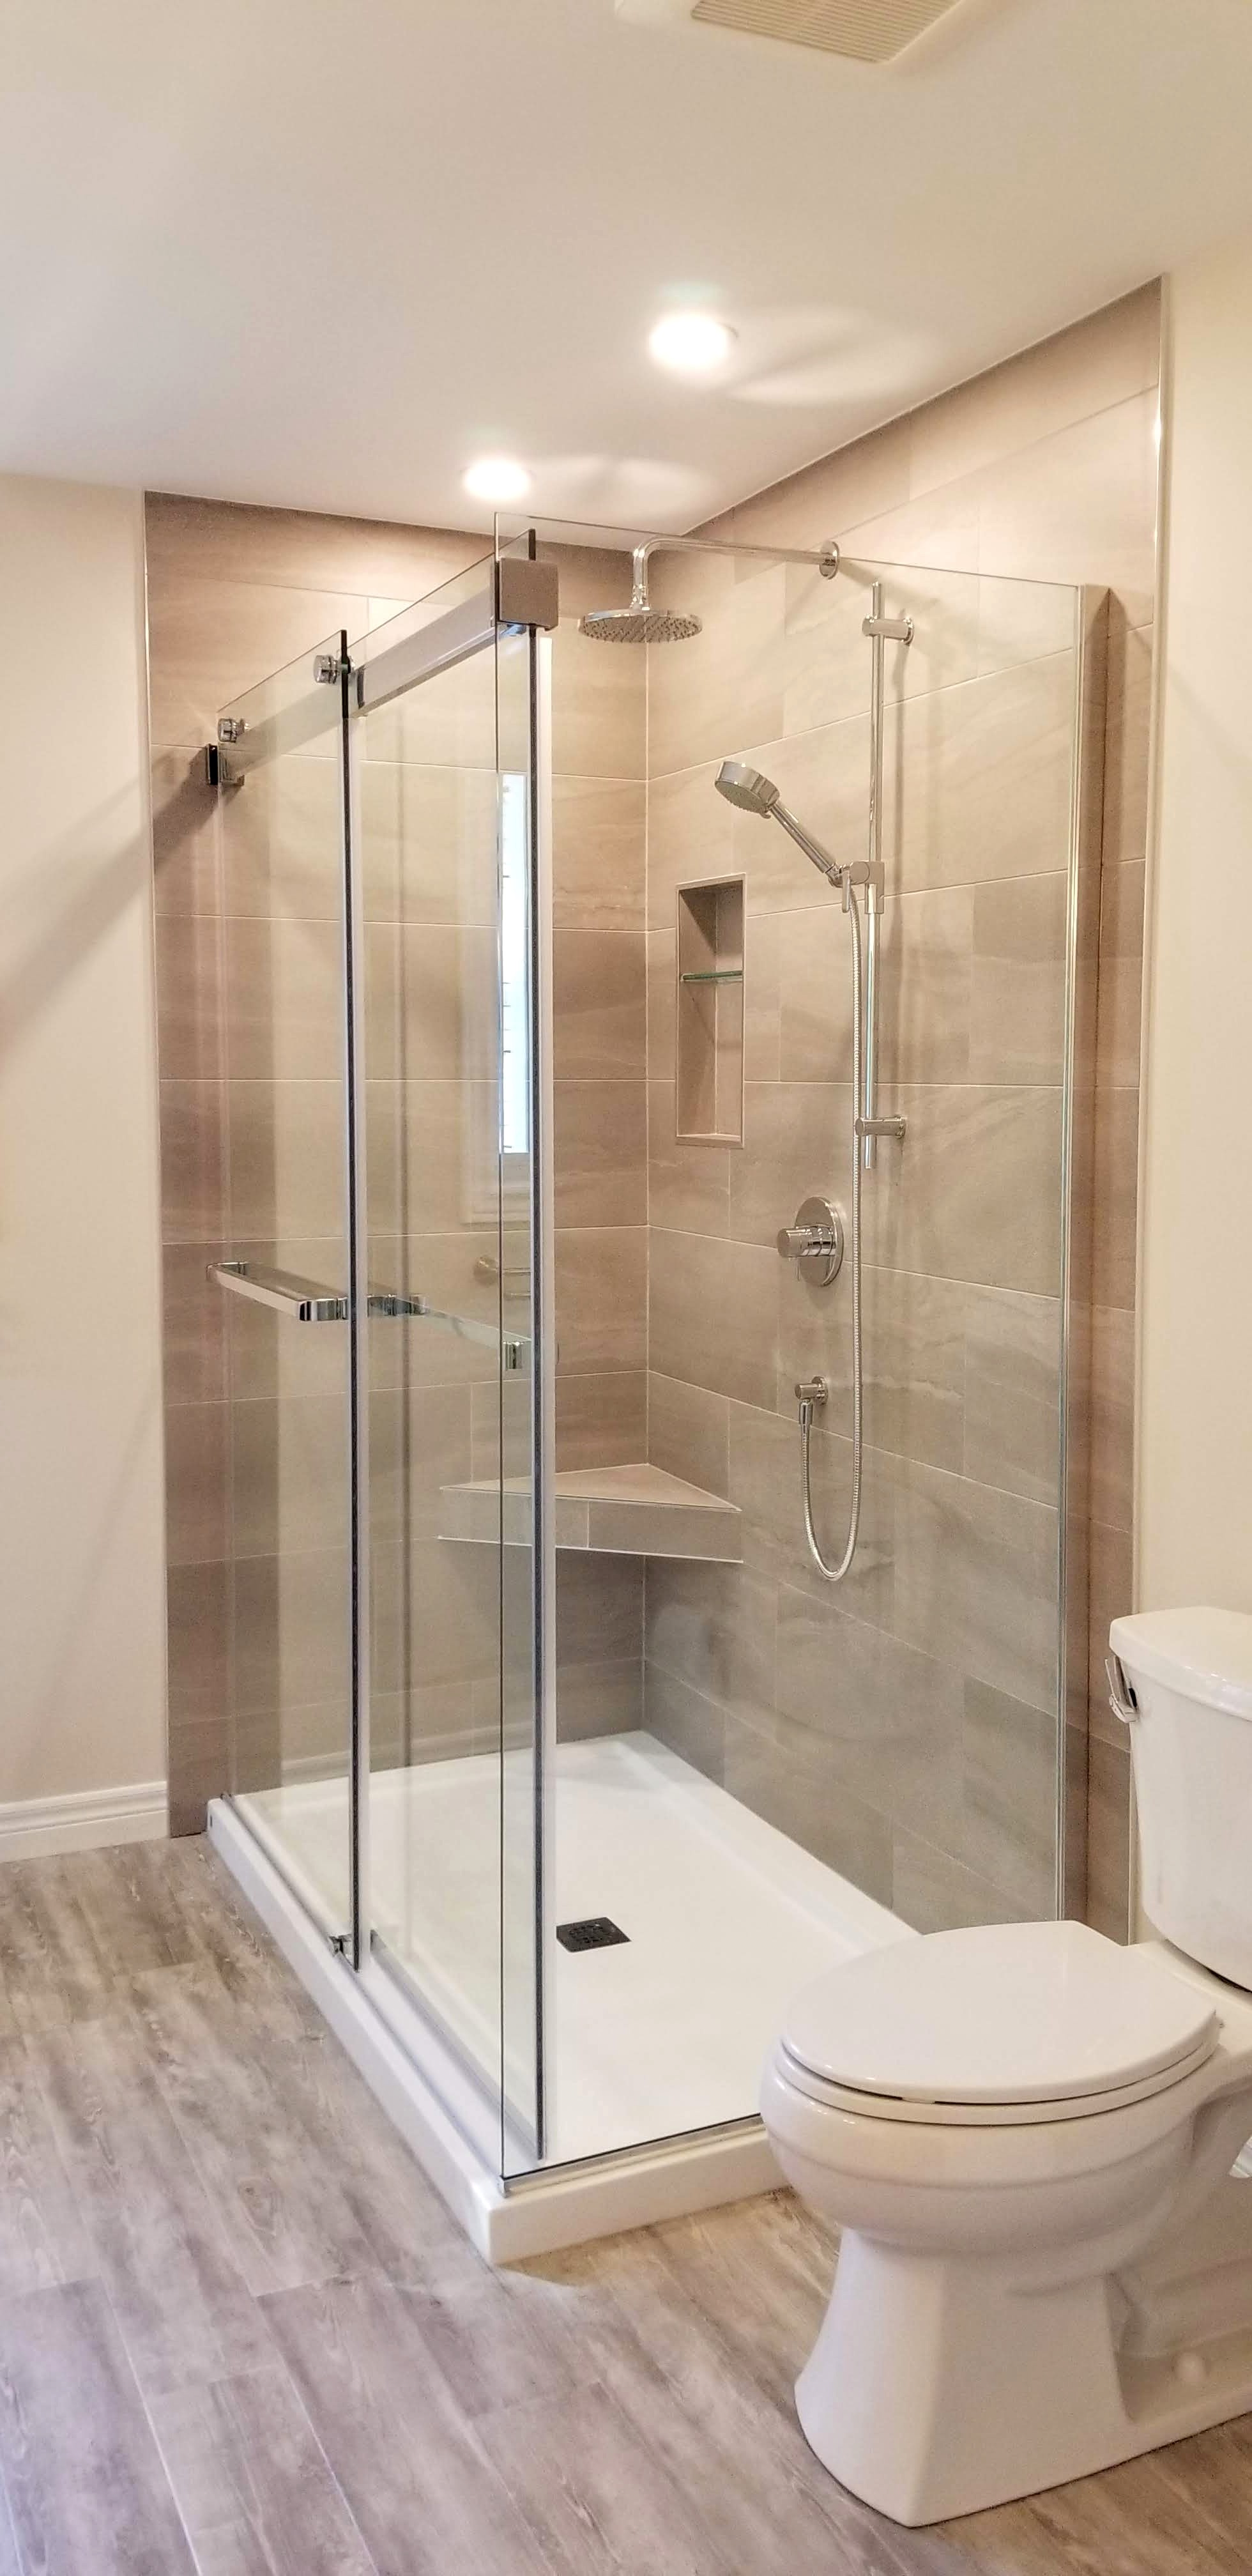 Tiled shower enclosed by glass door and panels by Germano Creative Interior Contracting Ltd.